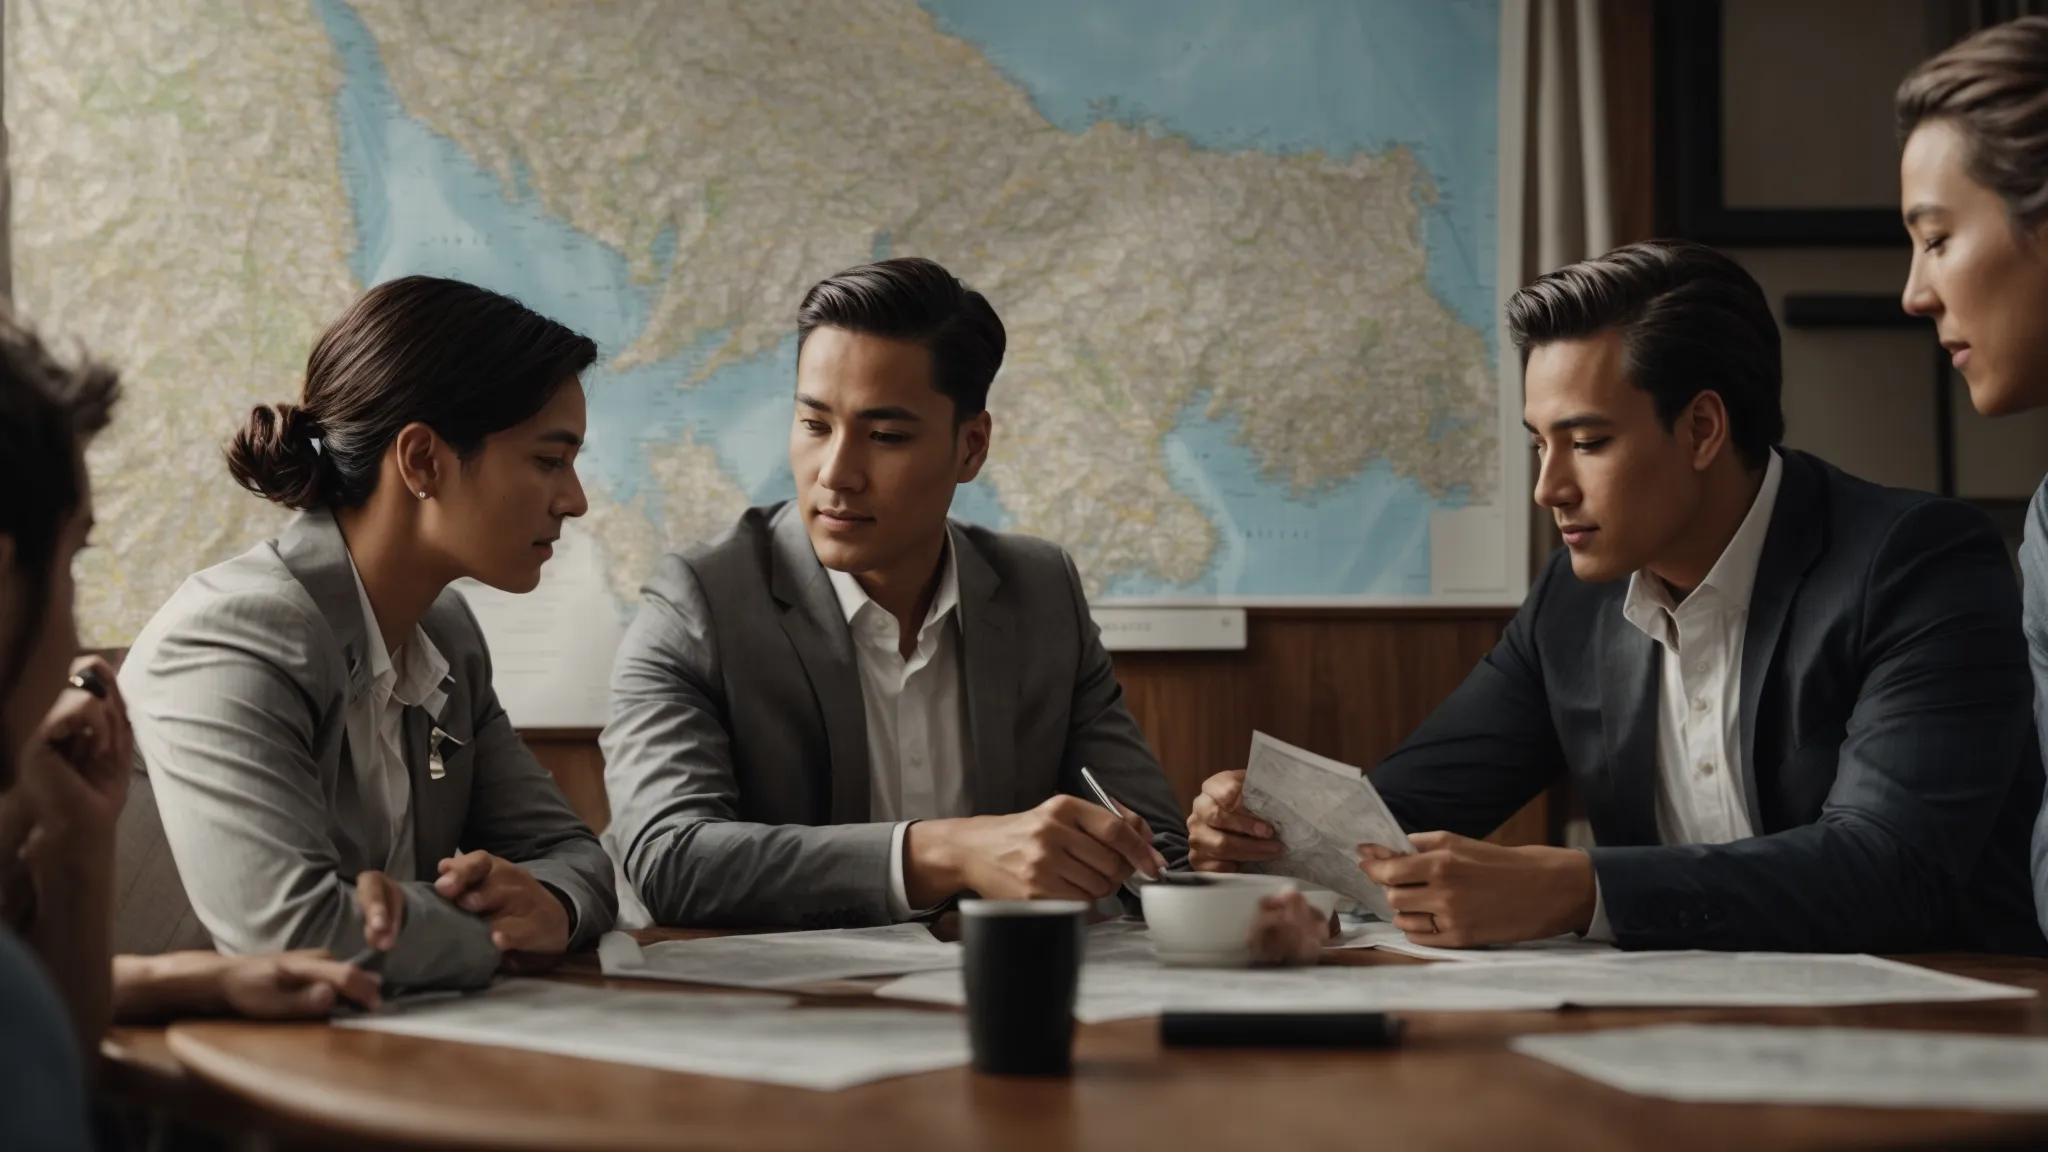 a group of confident marketers gathered around a table pointing at a map with local landmarks.